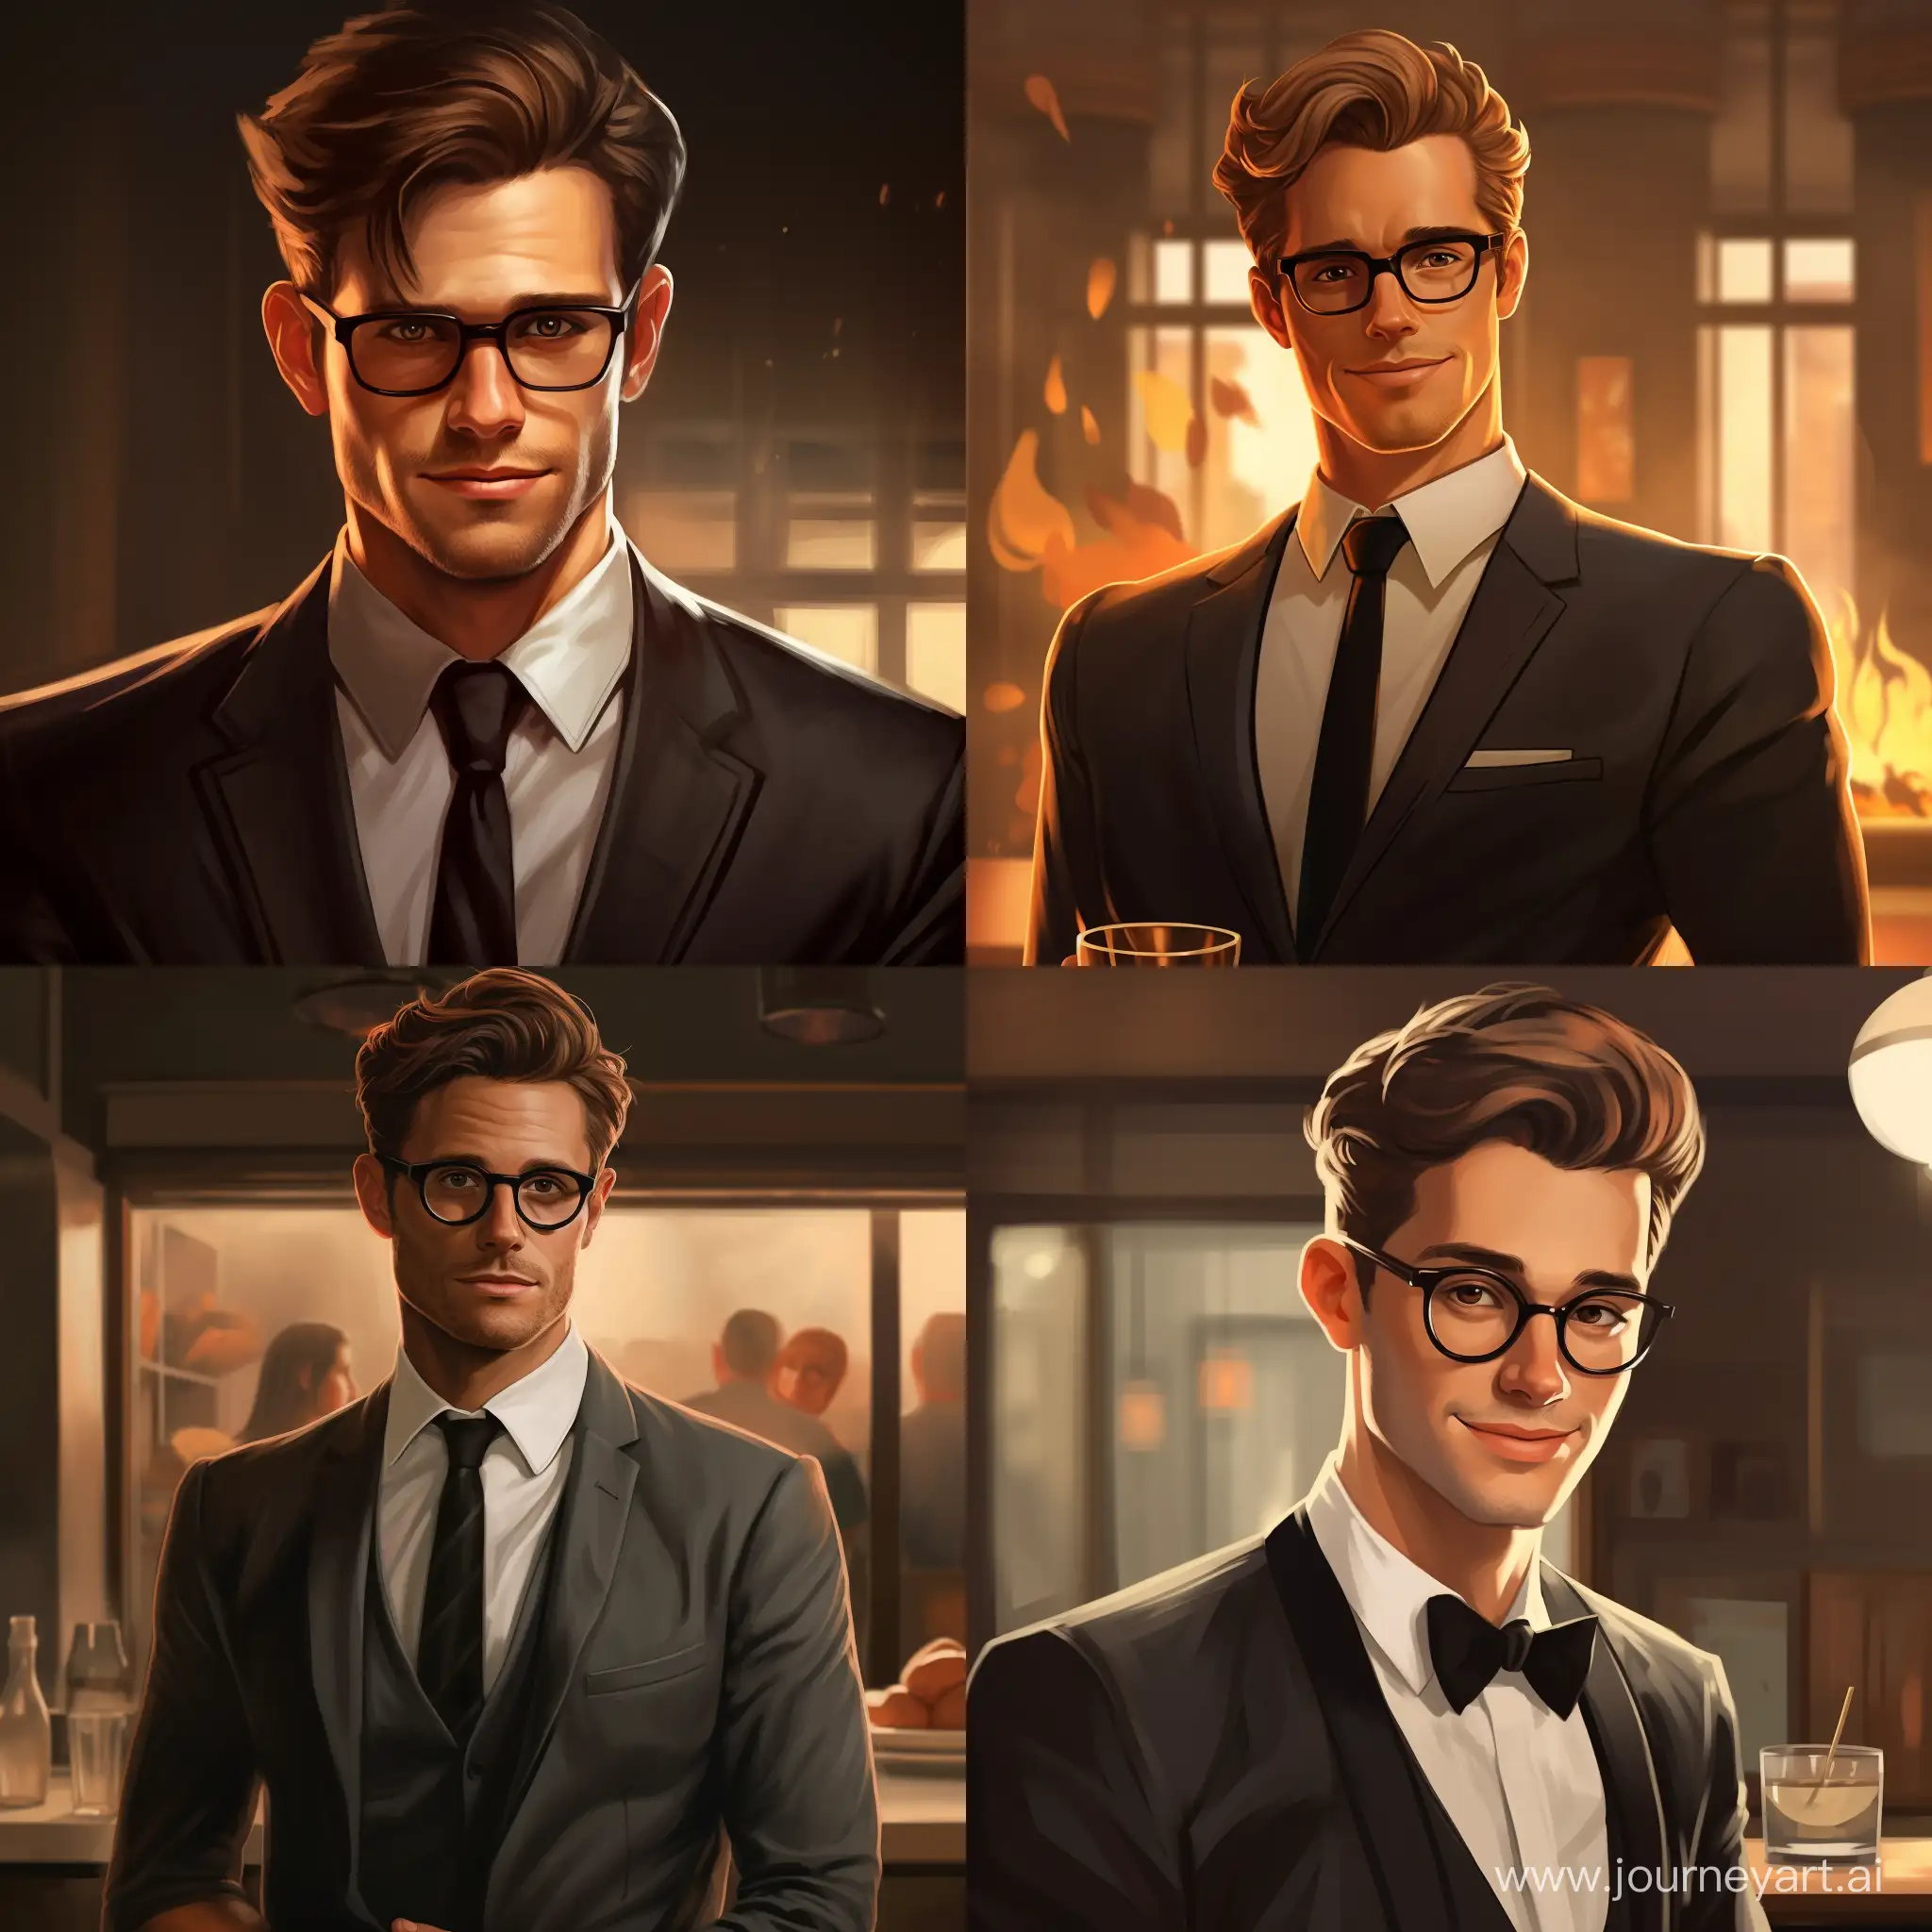 short haircut, strong charming handsome man, evil grin, elegant young scientist, elite, style, young businessman, tall, 25 years old, business suit, glasses, realism, character design, Zack Snyder style, expensive restaurant, evening